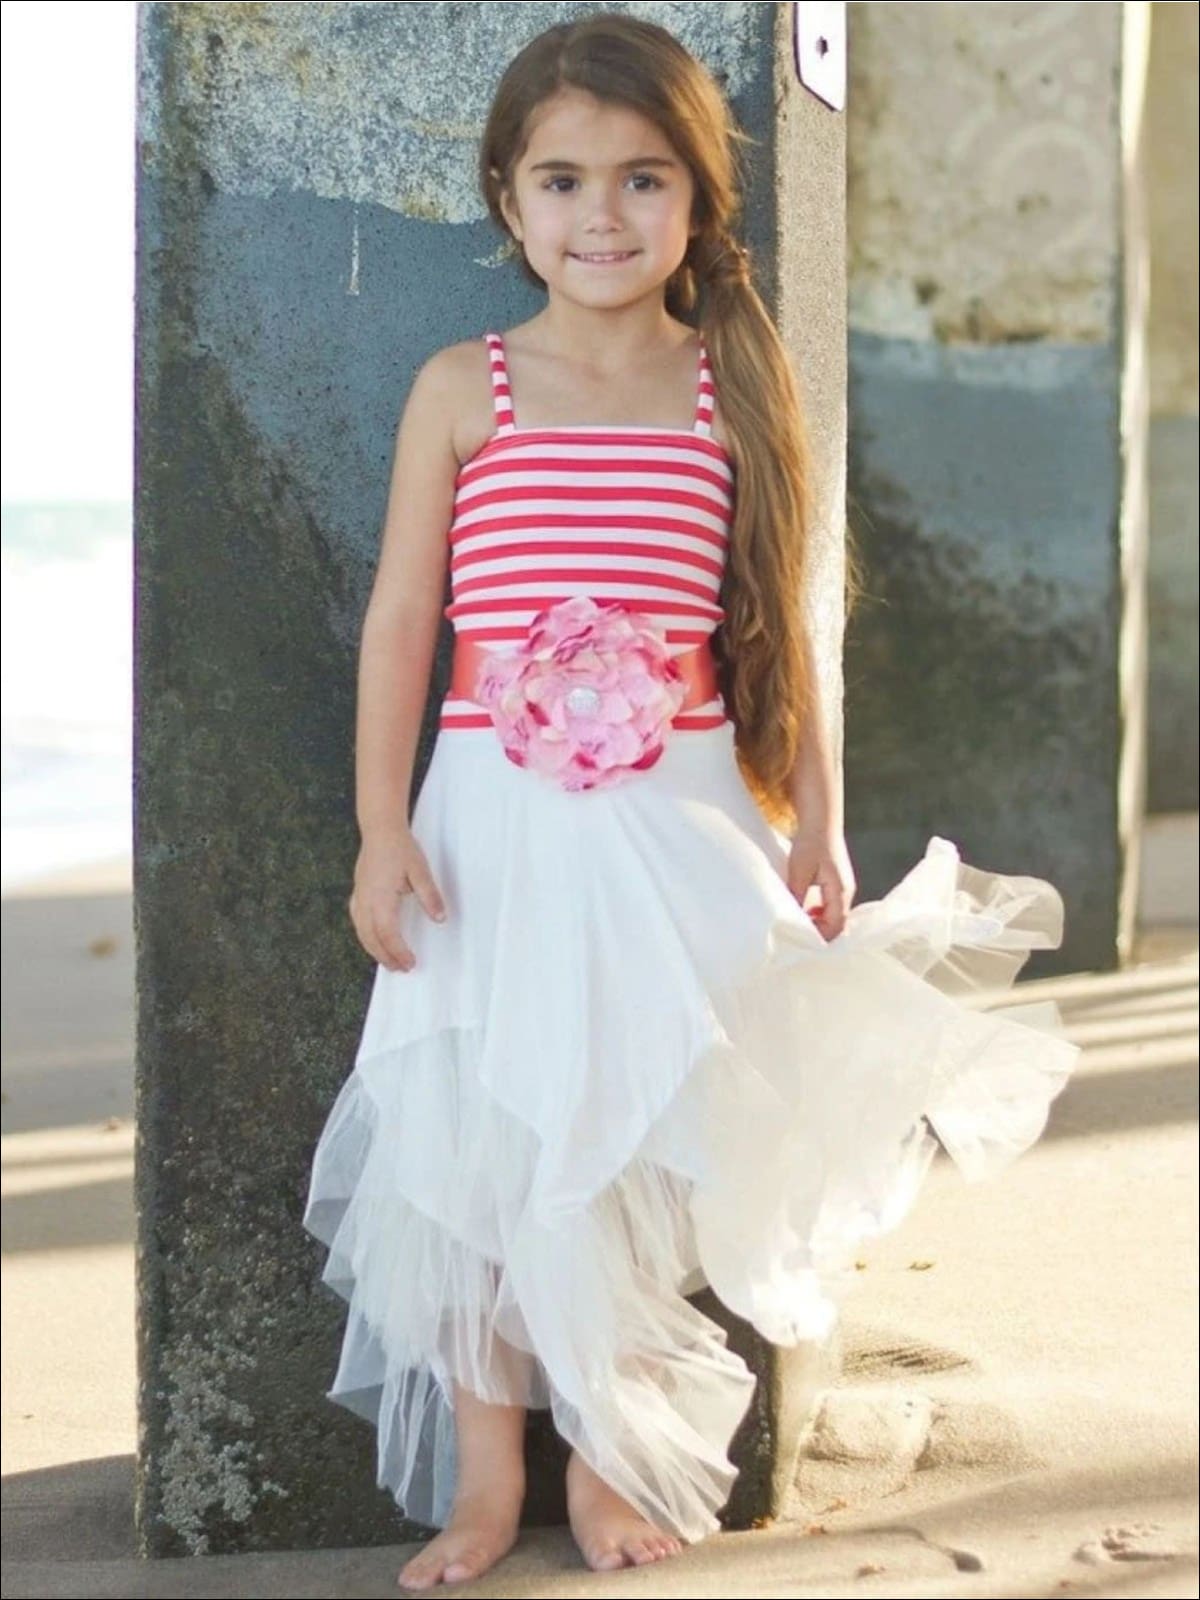 Girls Coral/Creme Hankerchief Dress With Flower Belt - Coral Creme / 4T - Girls Spring Dressy Dress